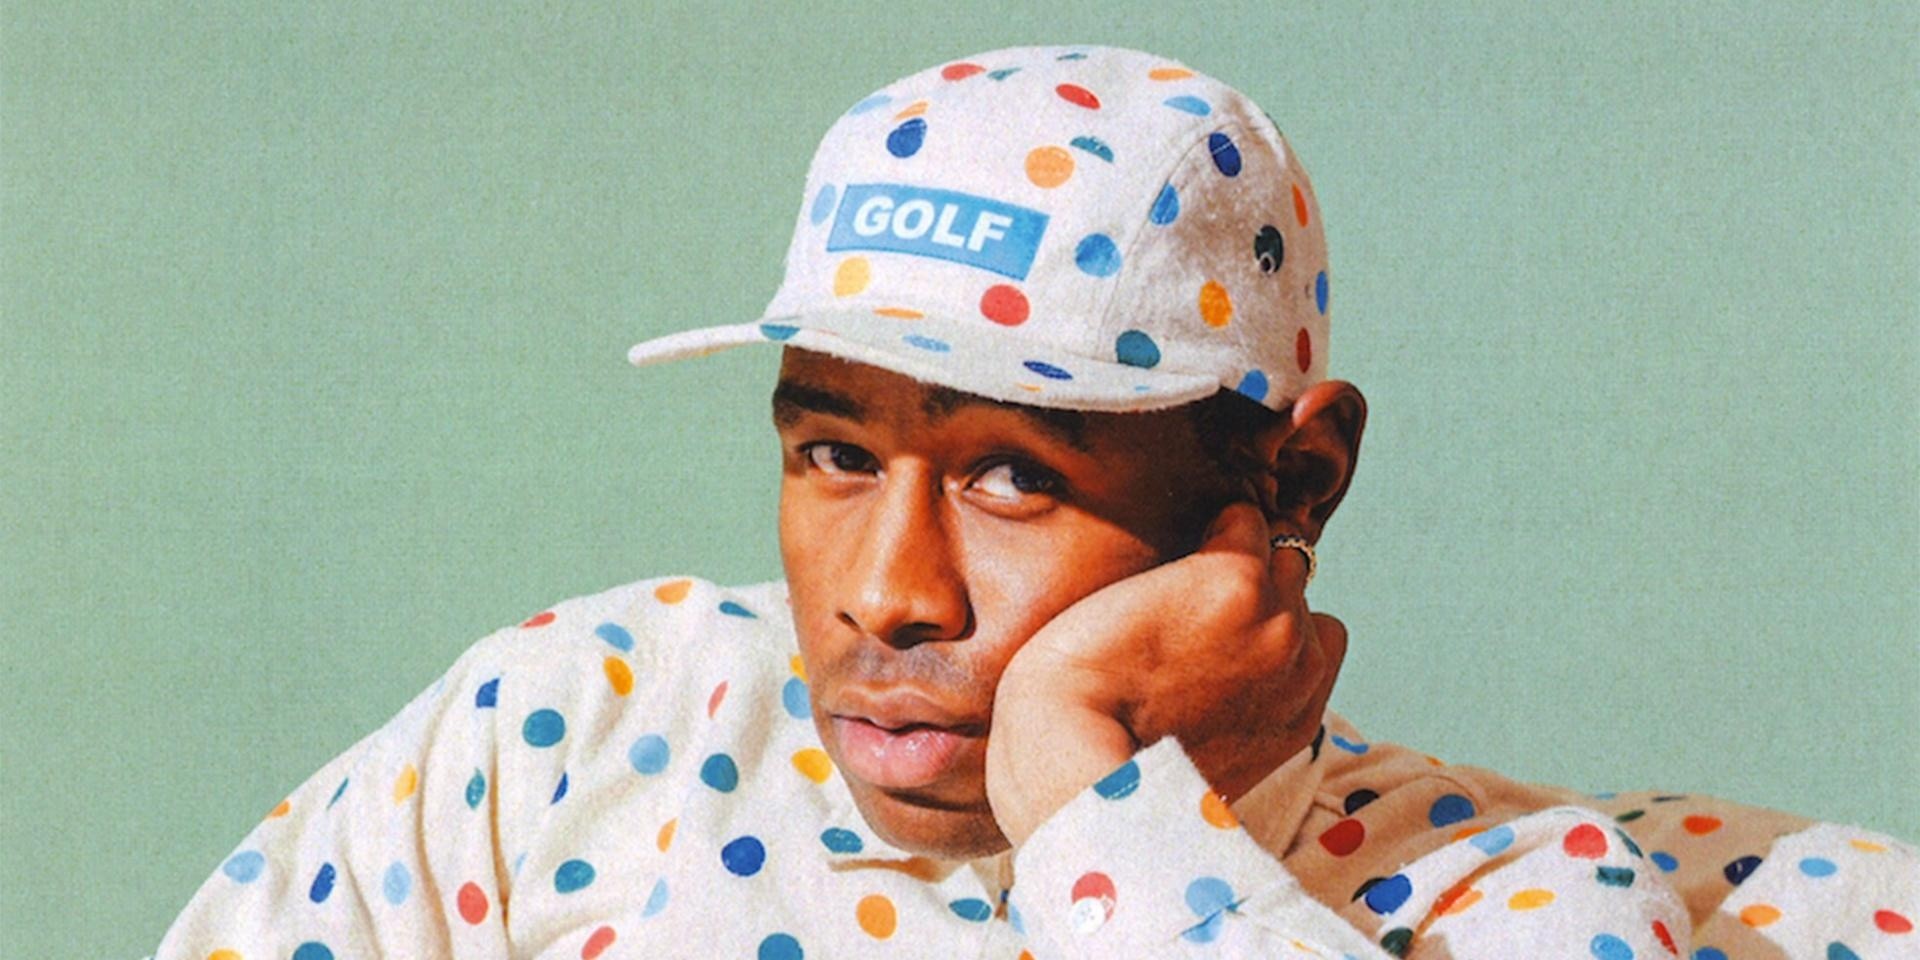 Tyler, The Creator's new album IGOR is out now – listen